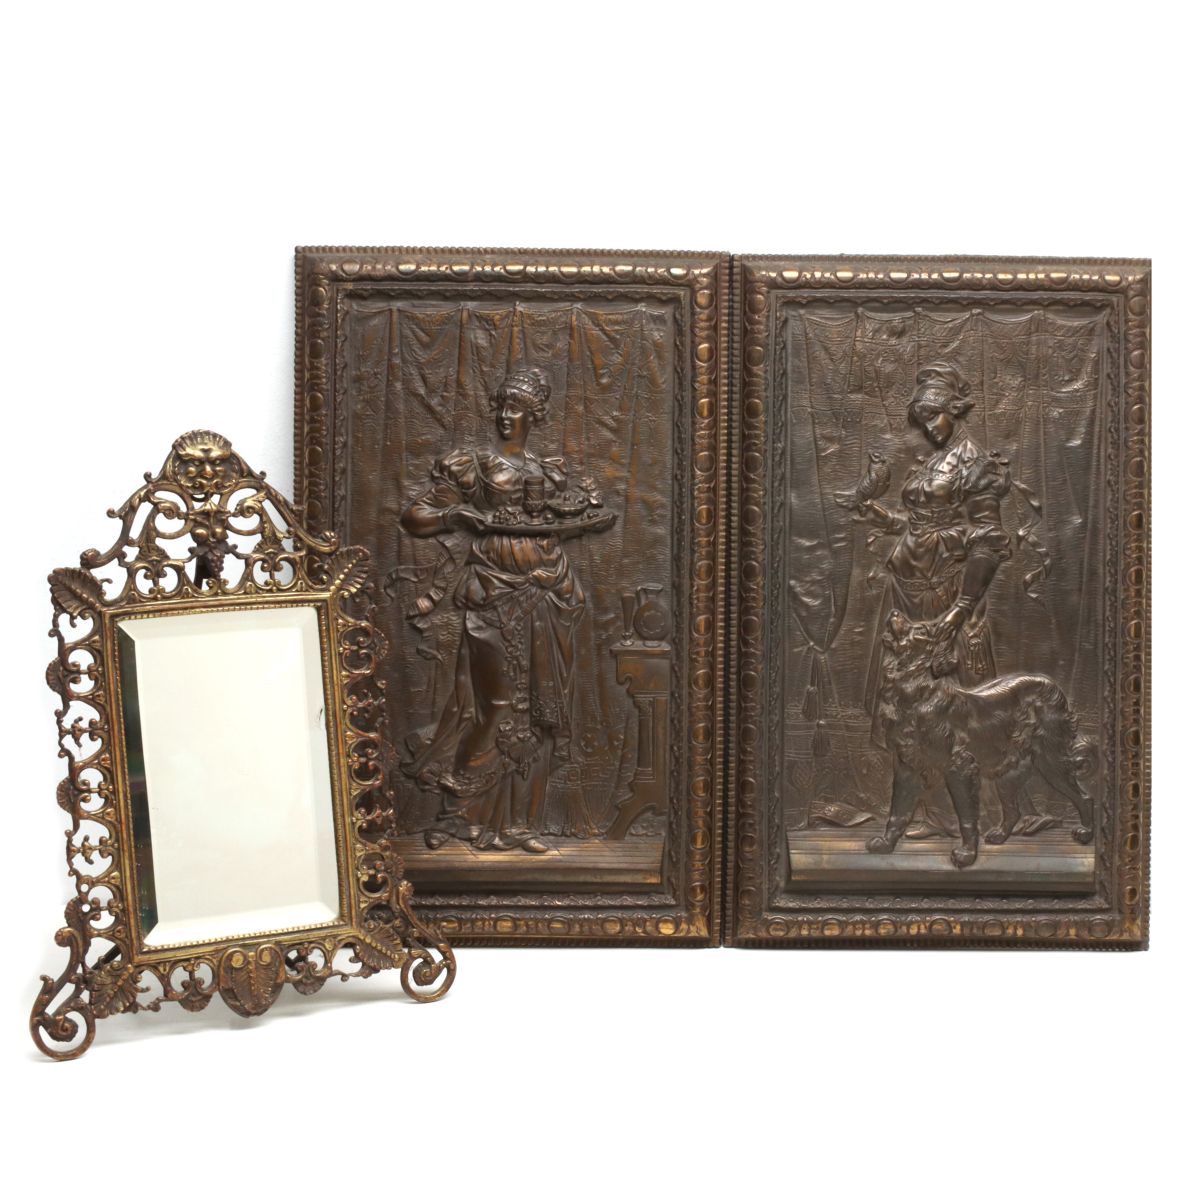 ORNATE VICTORIAN CAST IRON PLAQUES AND MIRROR FRAME